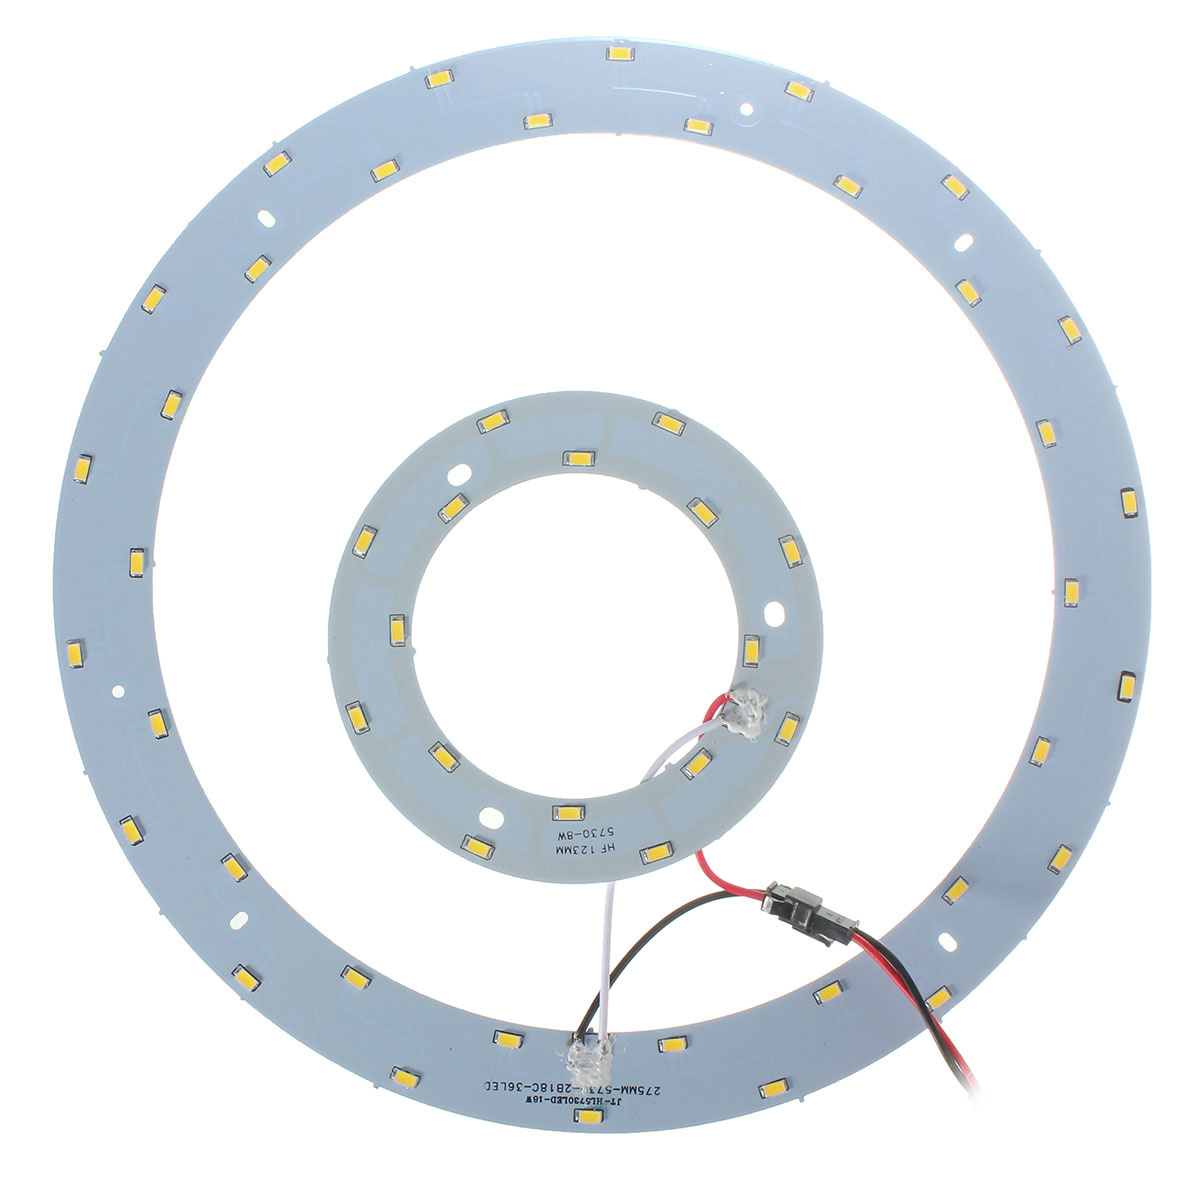 25W 5730 SMD LED Double Panel Circles Annular Ceiling Light Fixtures Board Lamp